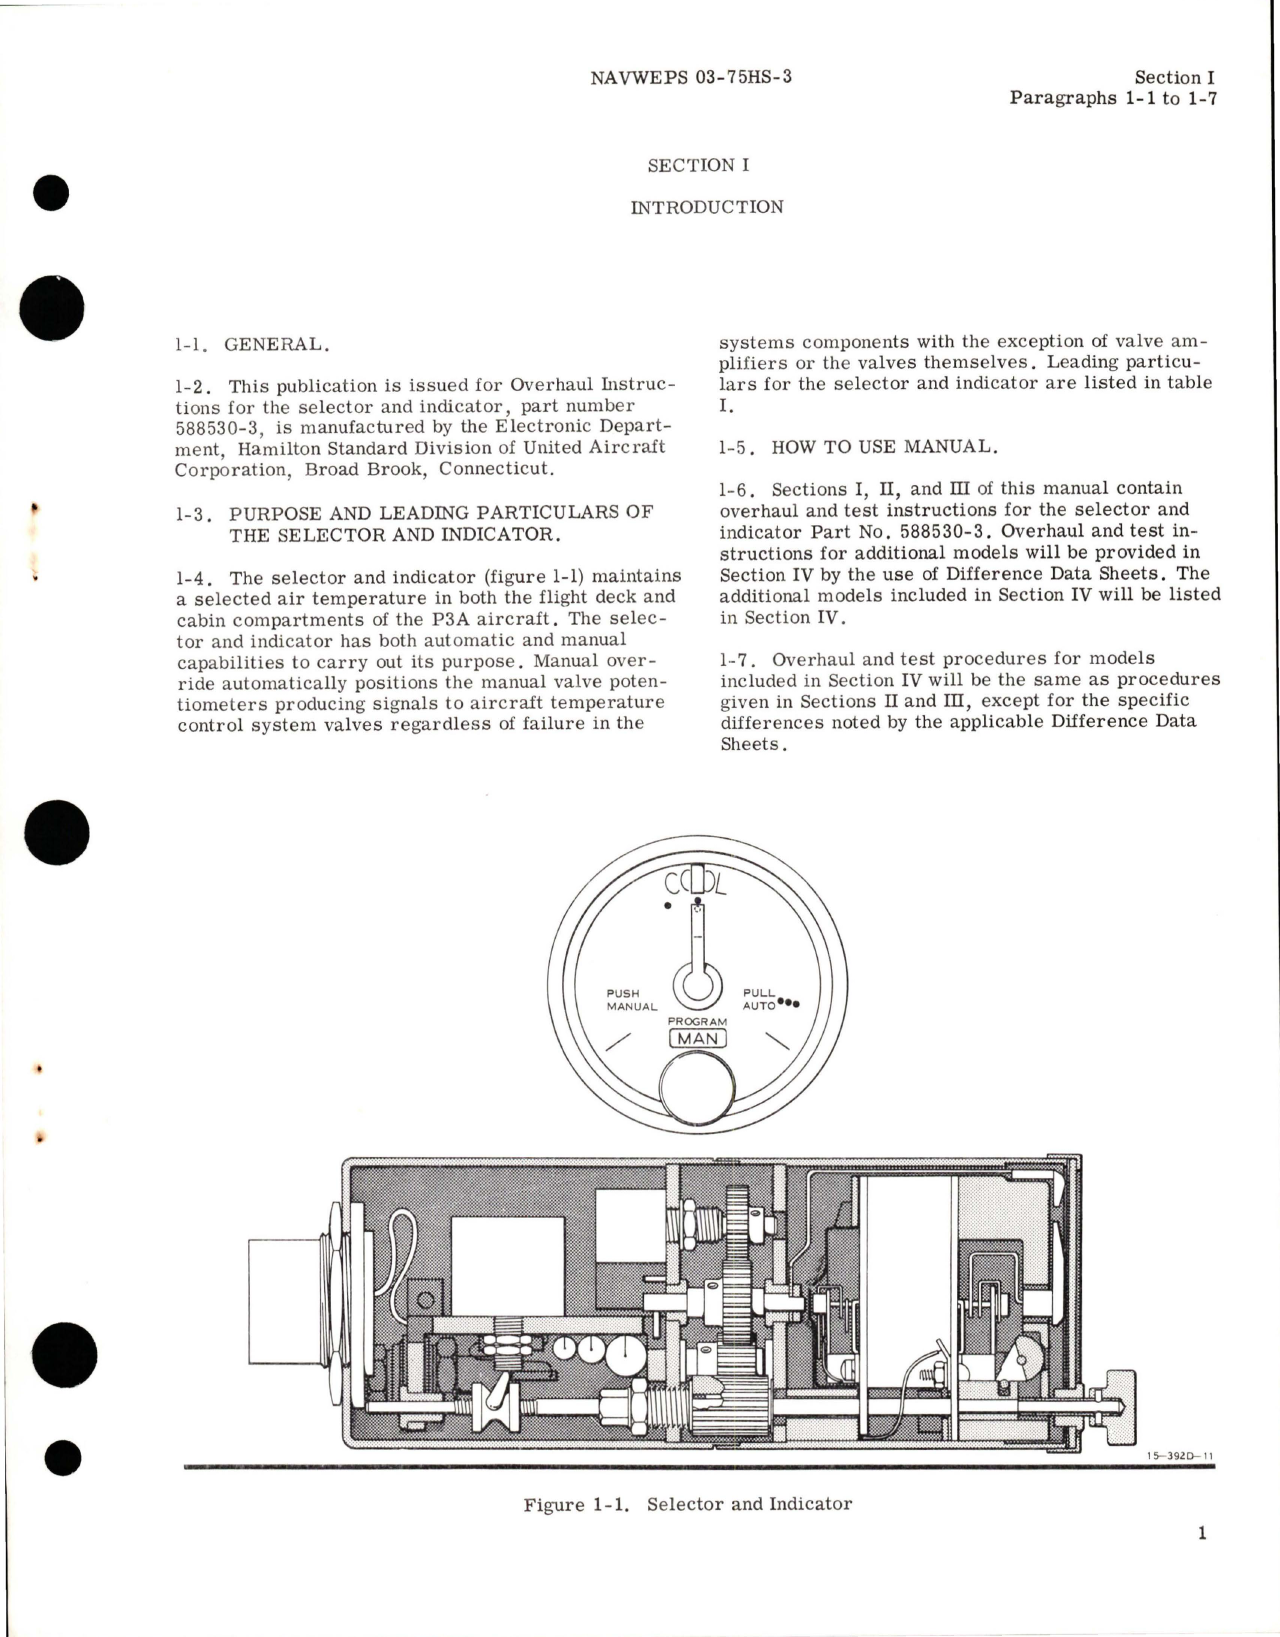 Sample page 5 from AirCorps Library document: Overhaul Instructions for Selector and Indicator - Part 588530-3 